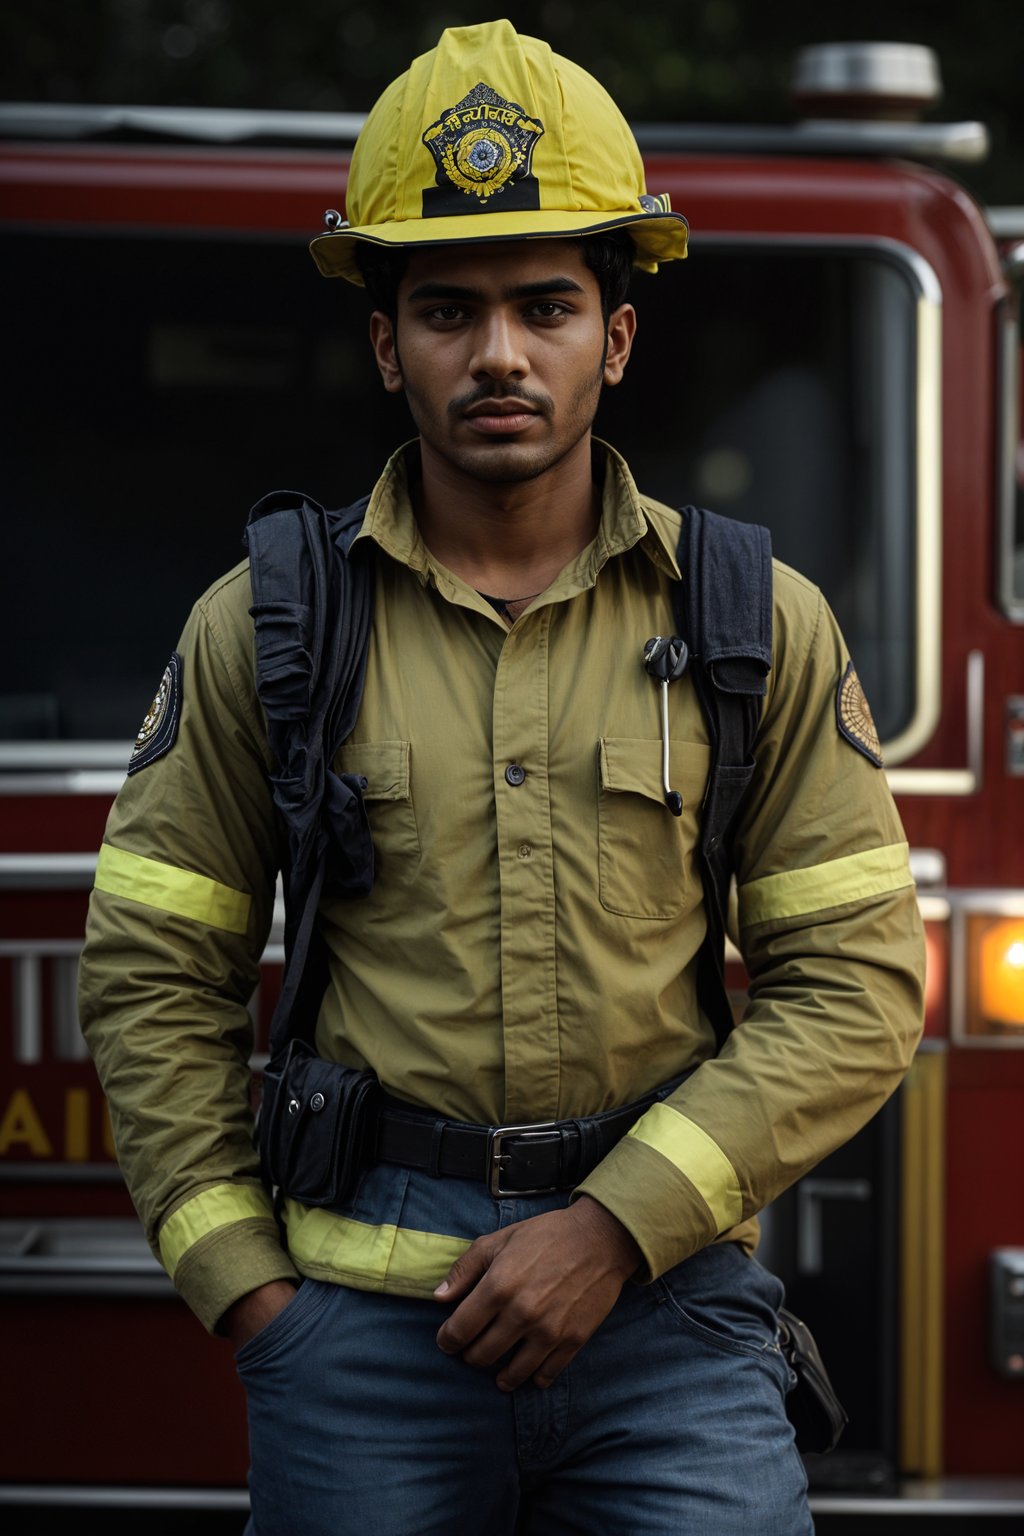 man as a Firefighter. highly detailed